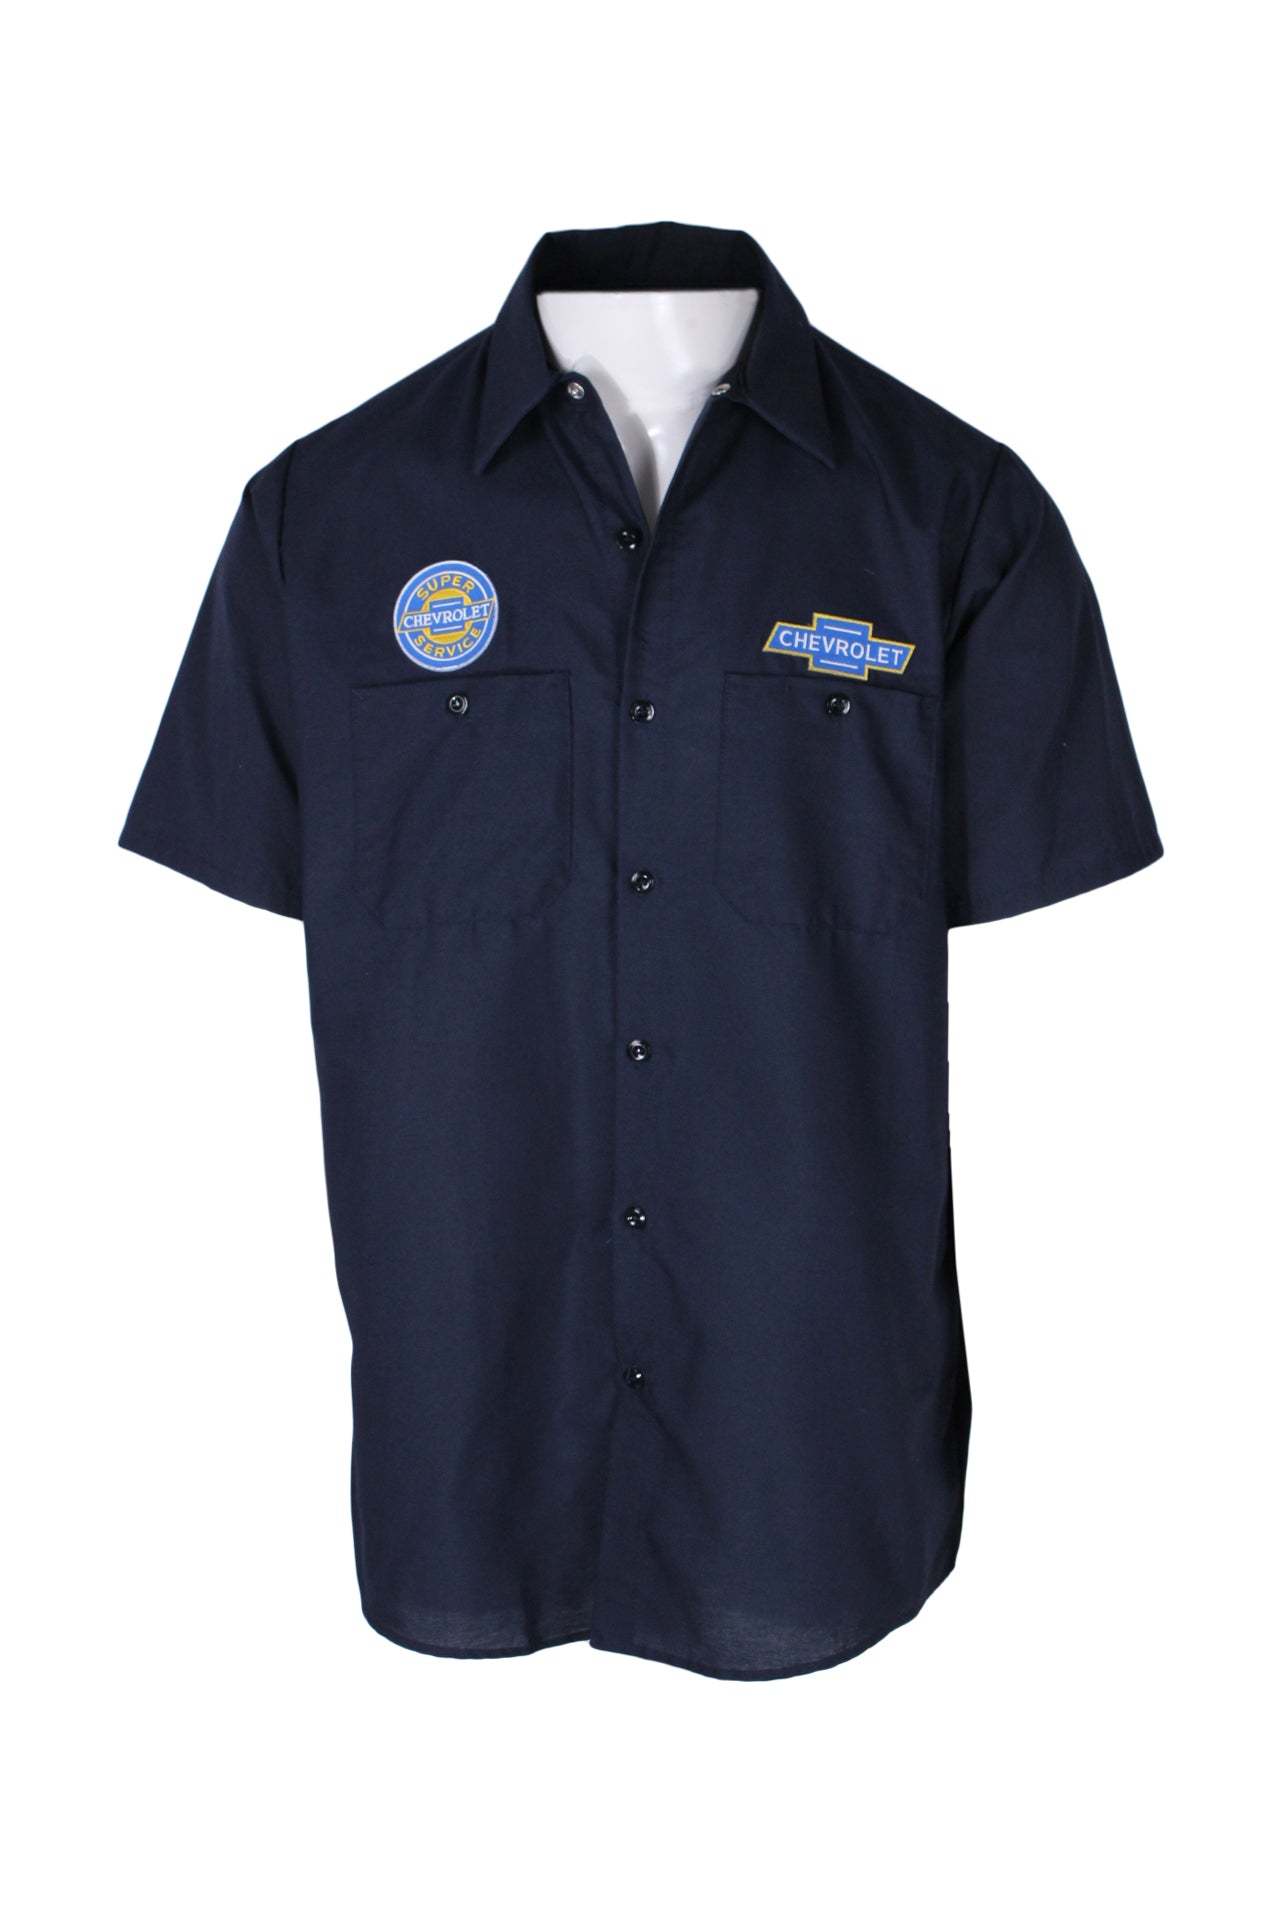 front angle of vintage red kap dark blue chevrolet service shirt on masc mannequin torso. features short sleeves, button closure up center, two buttoned breast pockets, pointed collar, and branded embroidered patches over pockets with text 'chevrolet super service' and 'chevrolet'. 